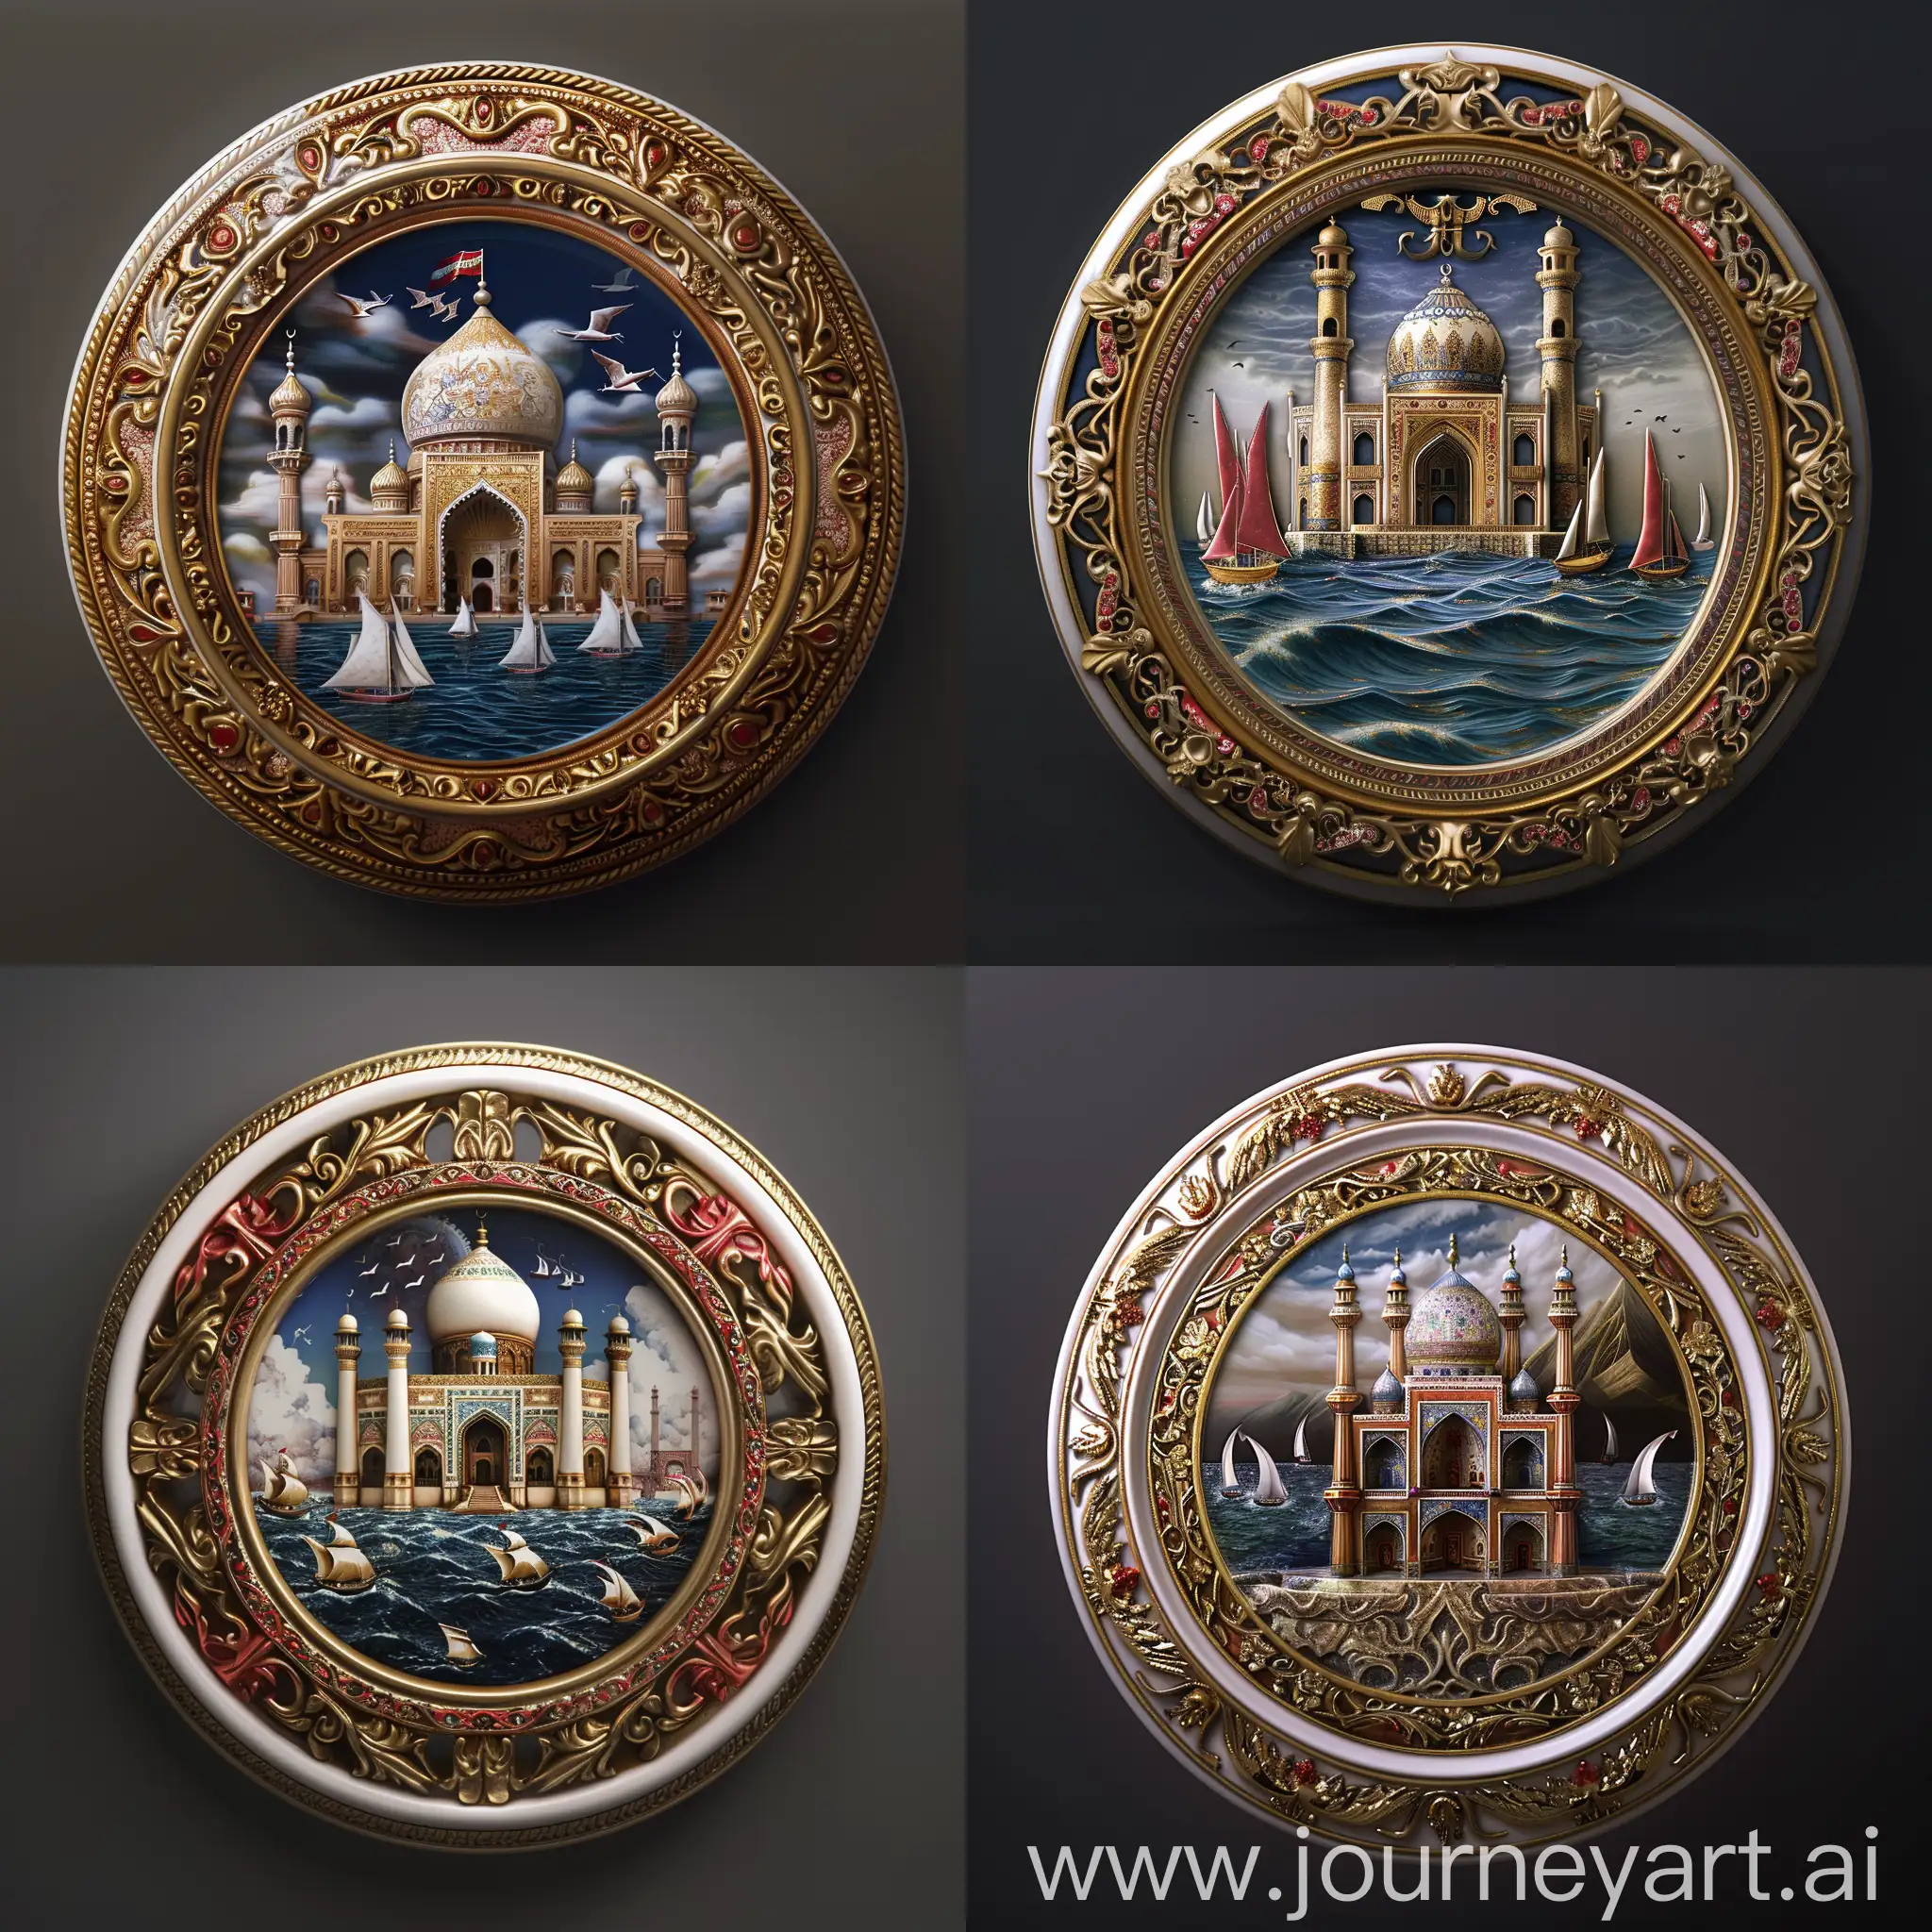 Persian-Mosque-Ocean-View-Souvenir-Plate-with-Sailing-Ships